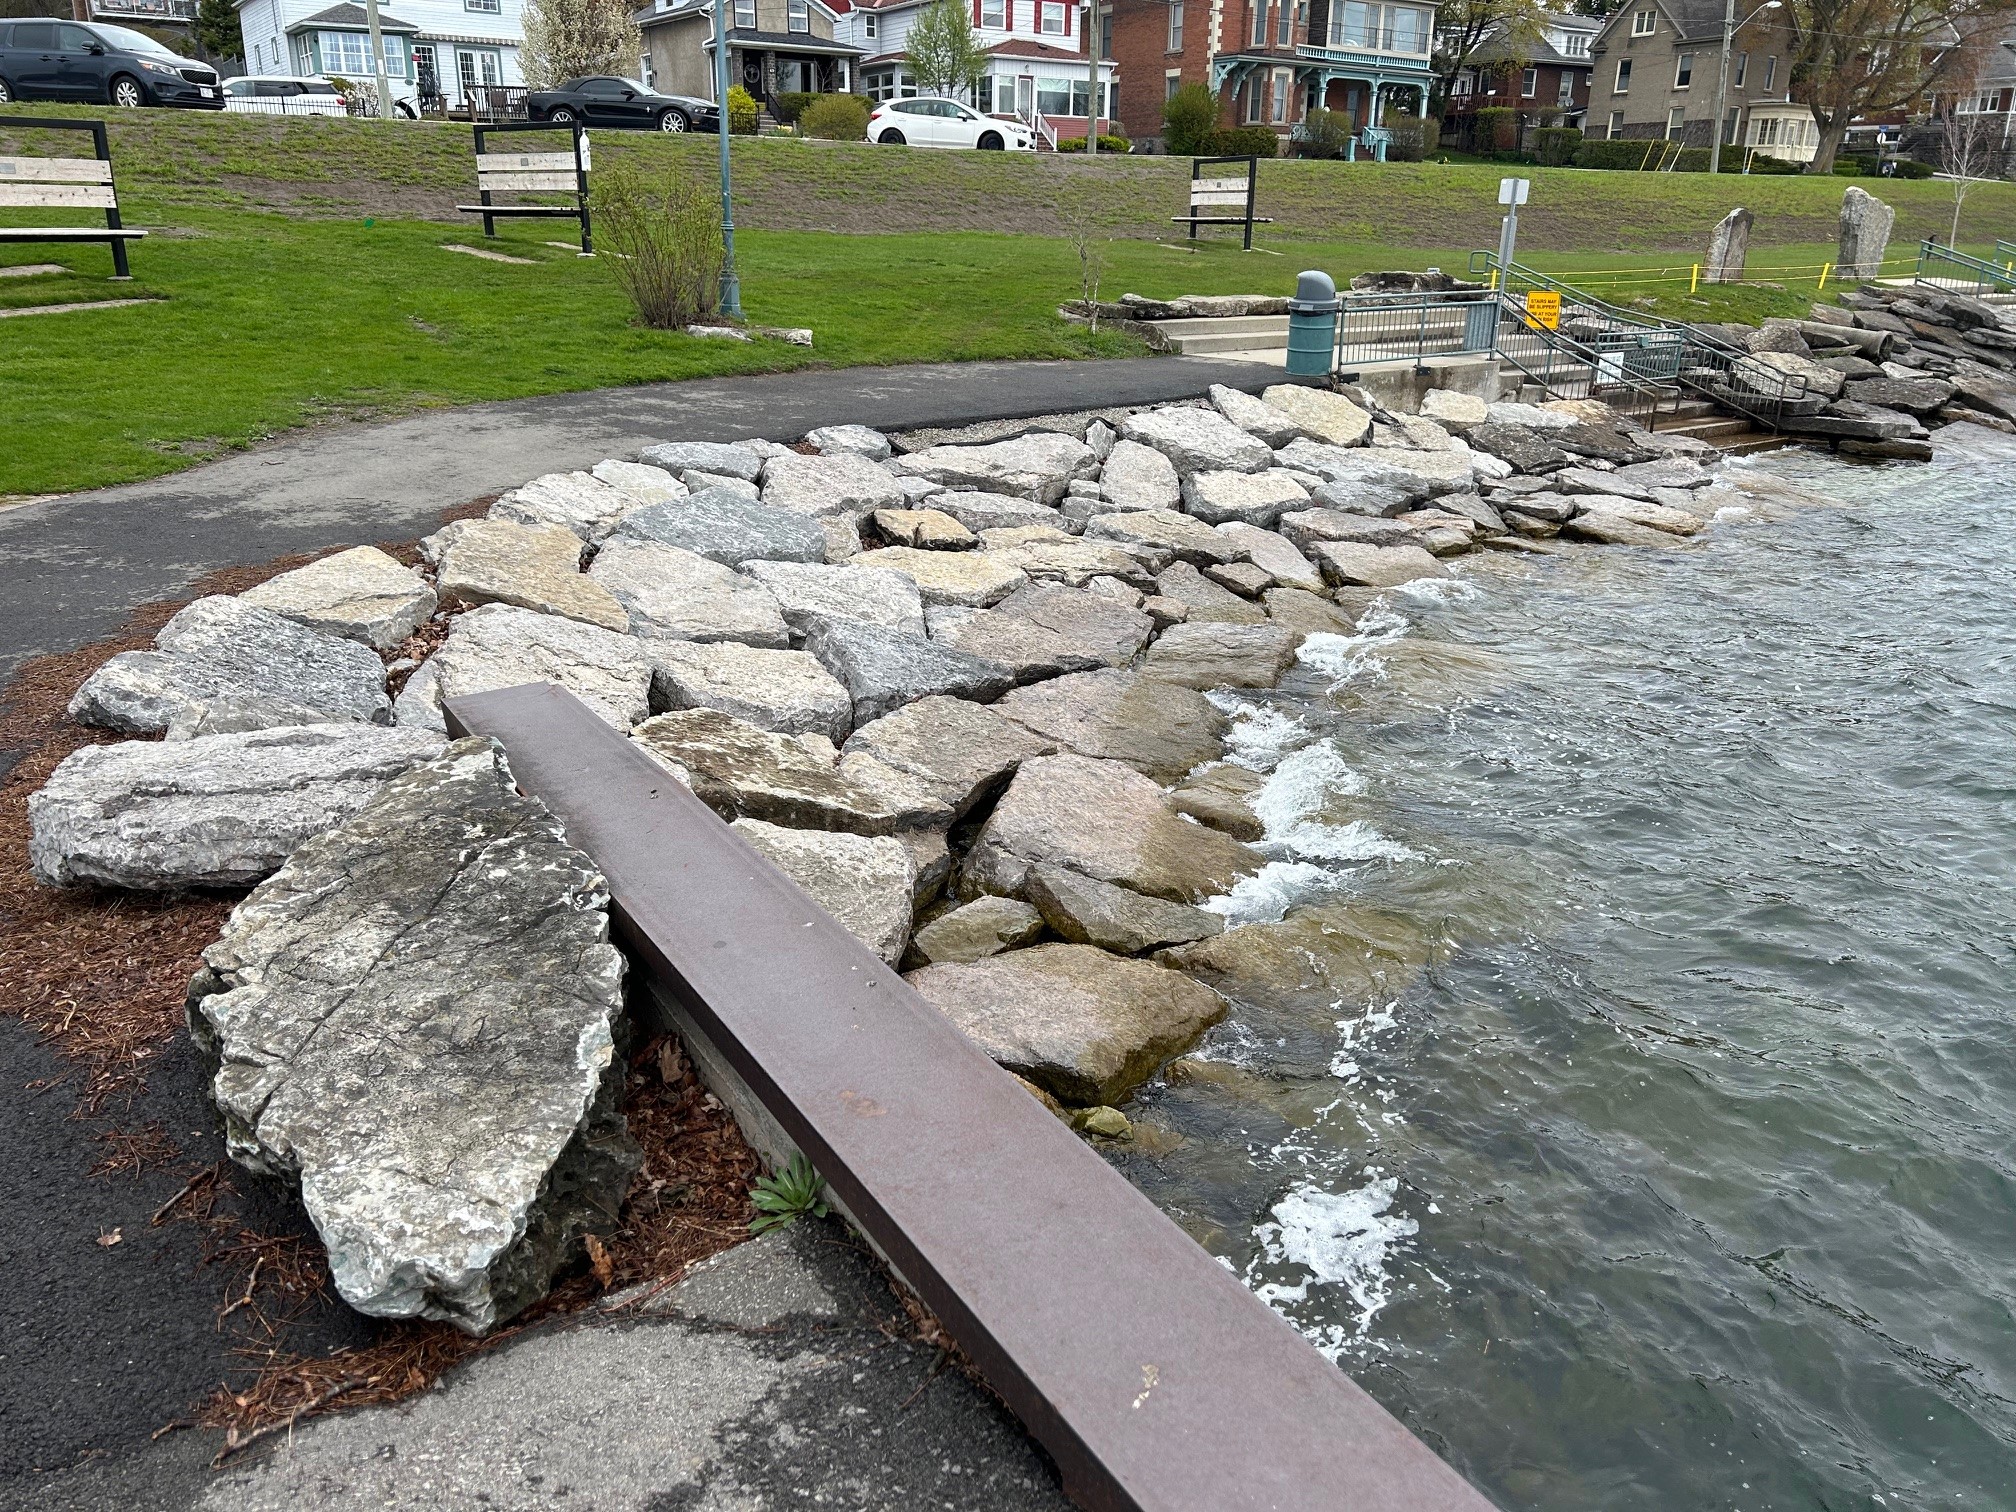 Additional armour added to the seawall to prevent erosion